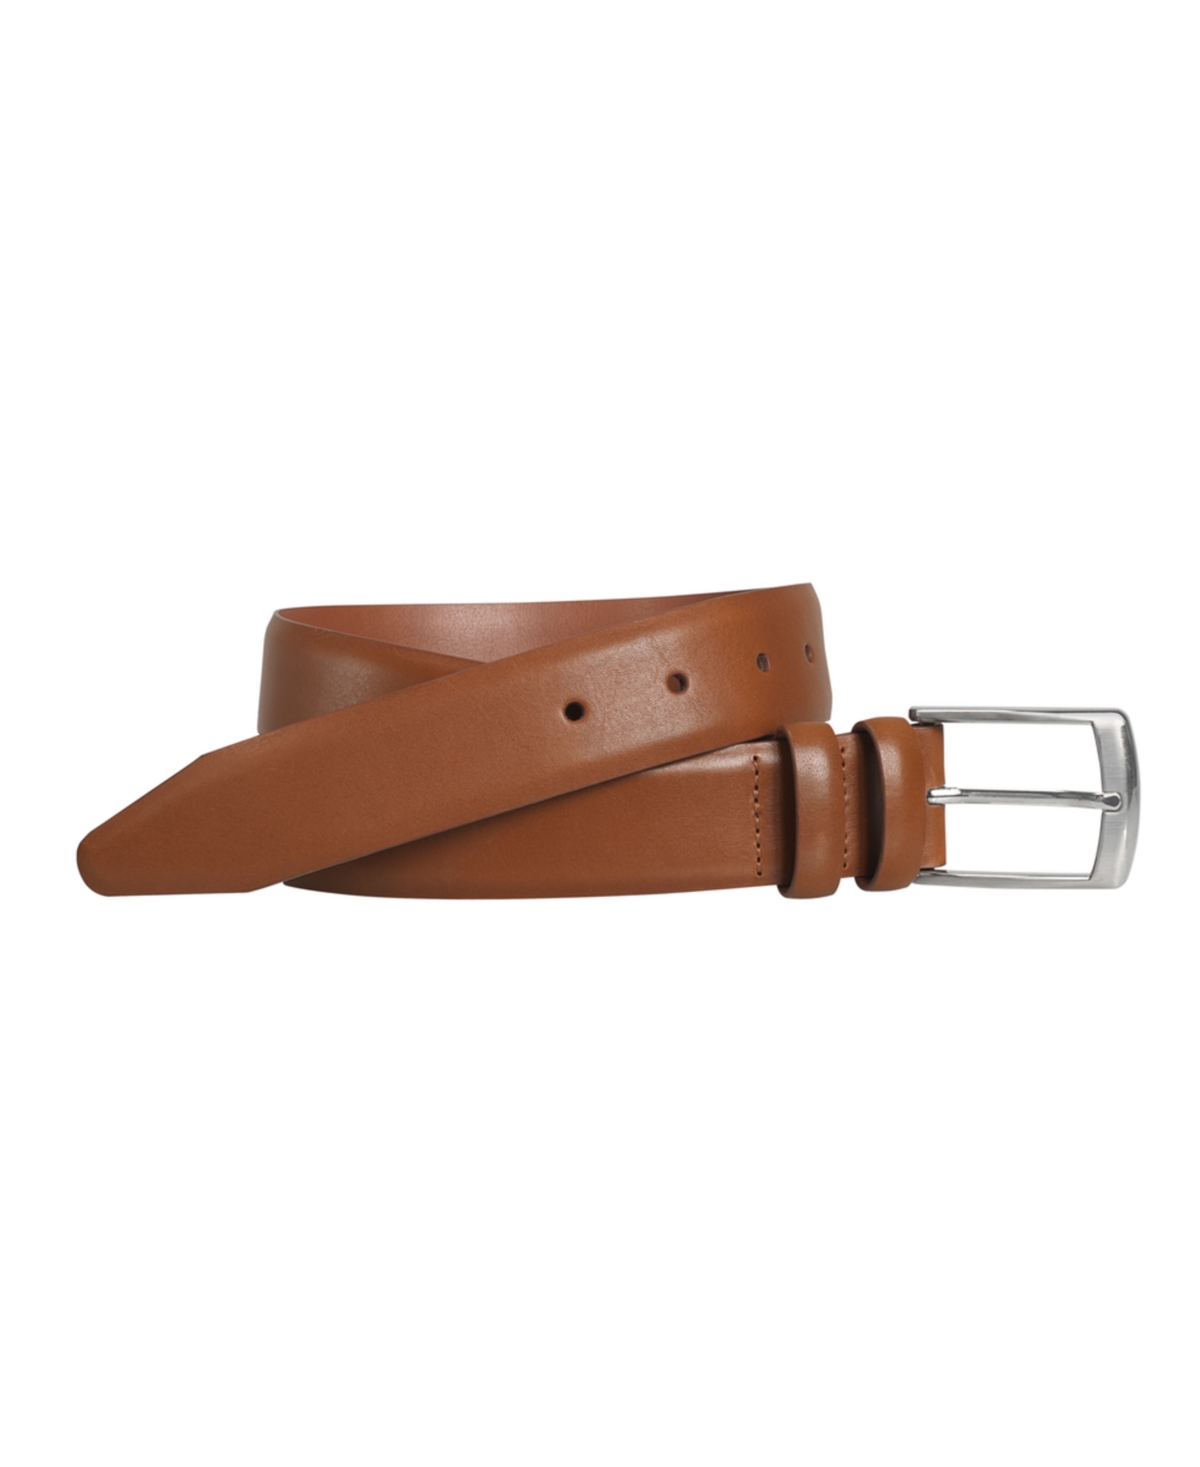 Men's Feathered Edge Belt - Tan Leather